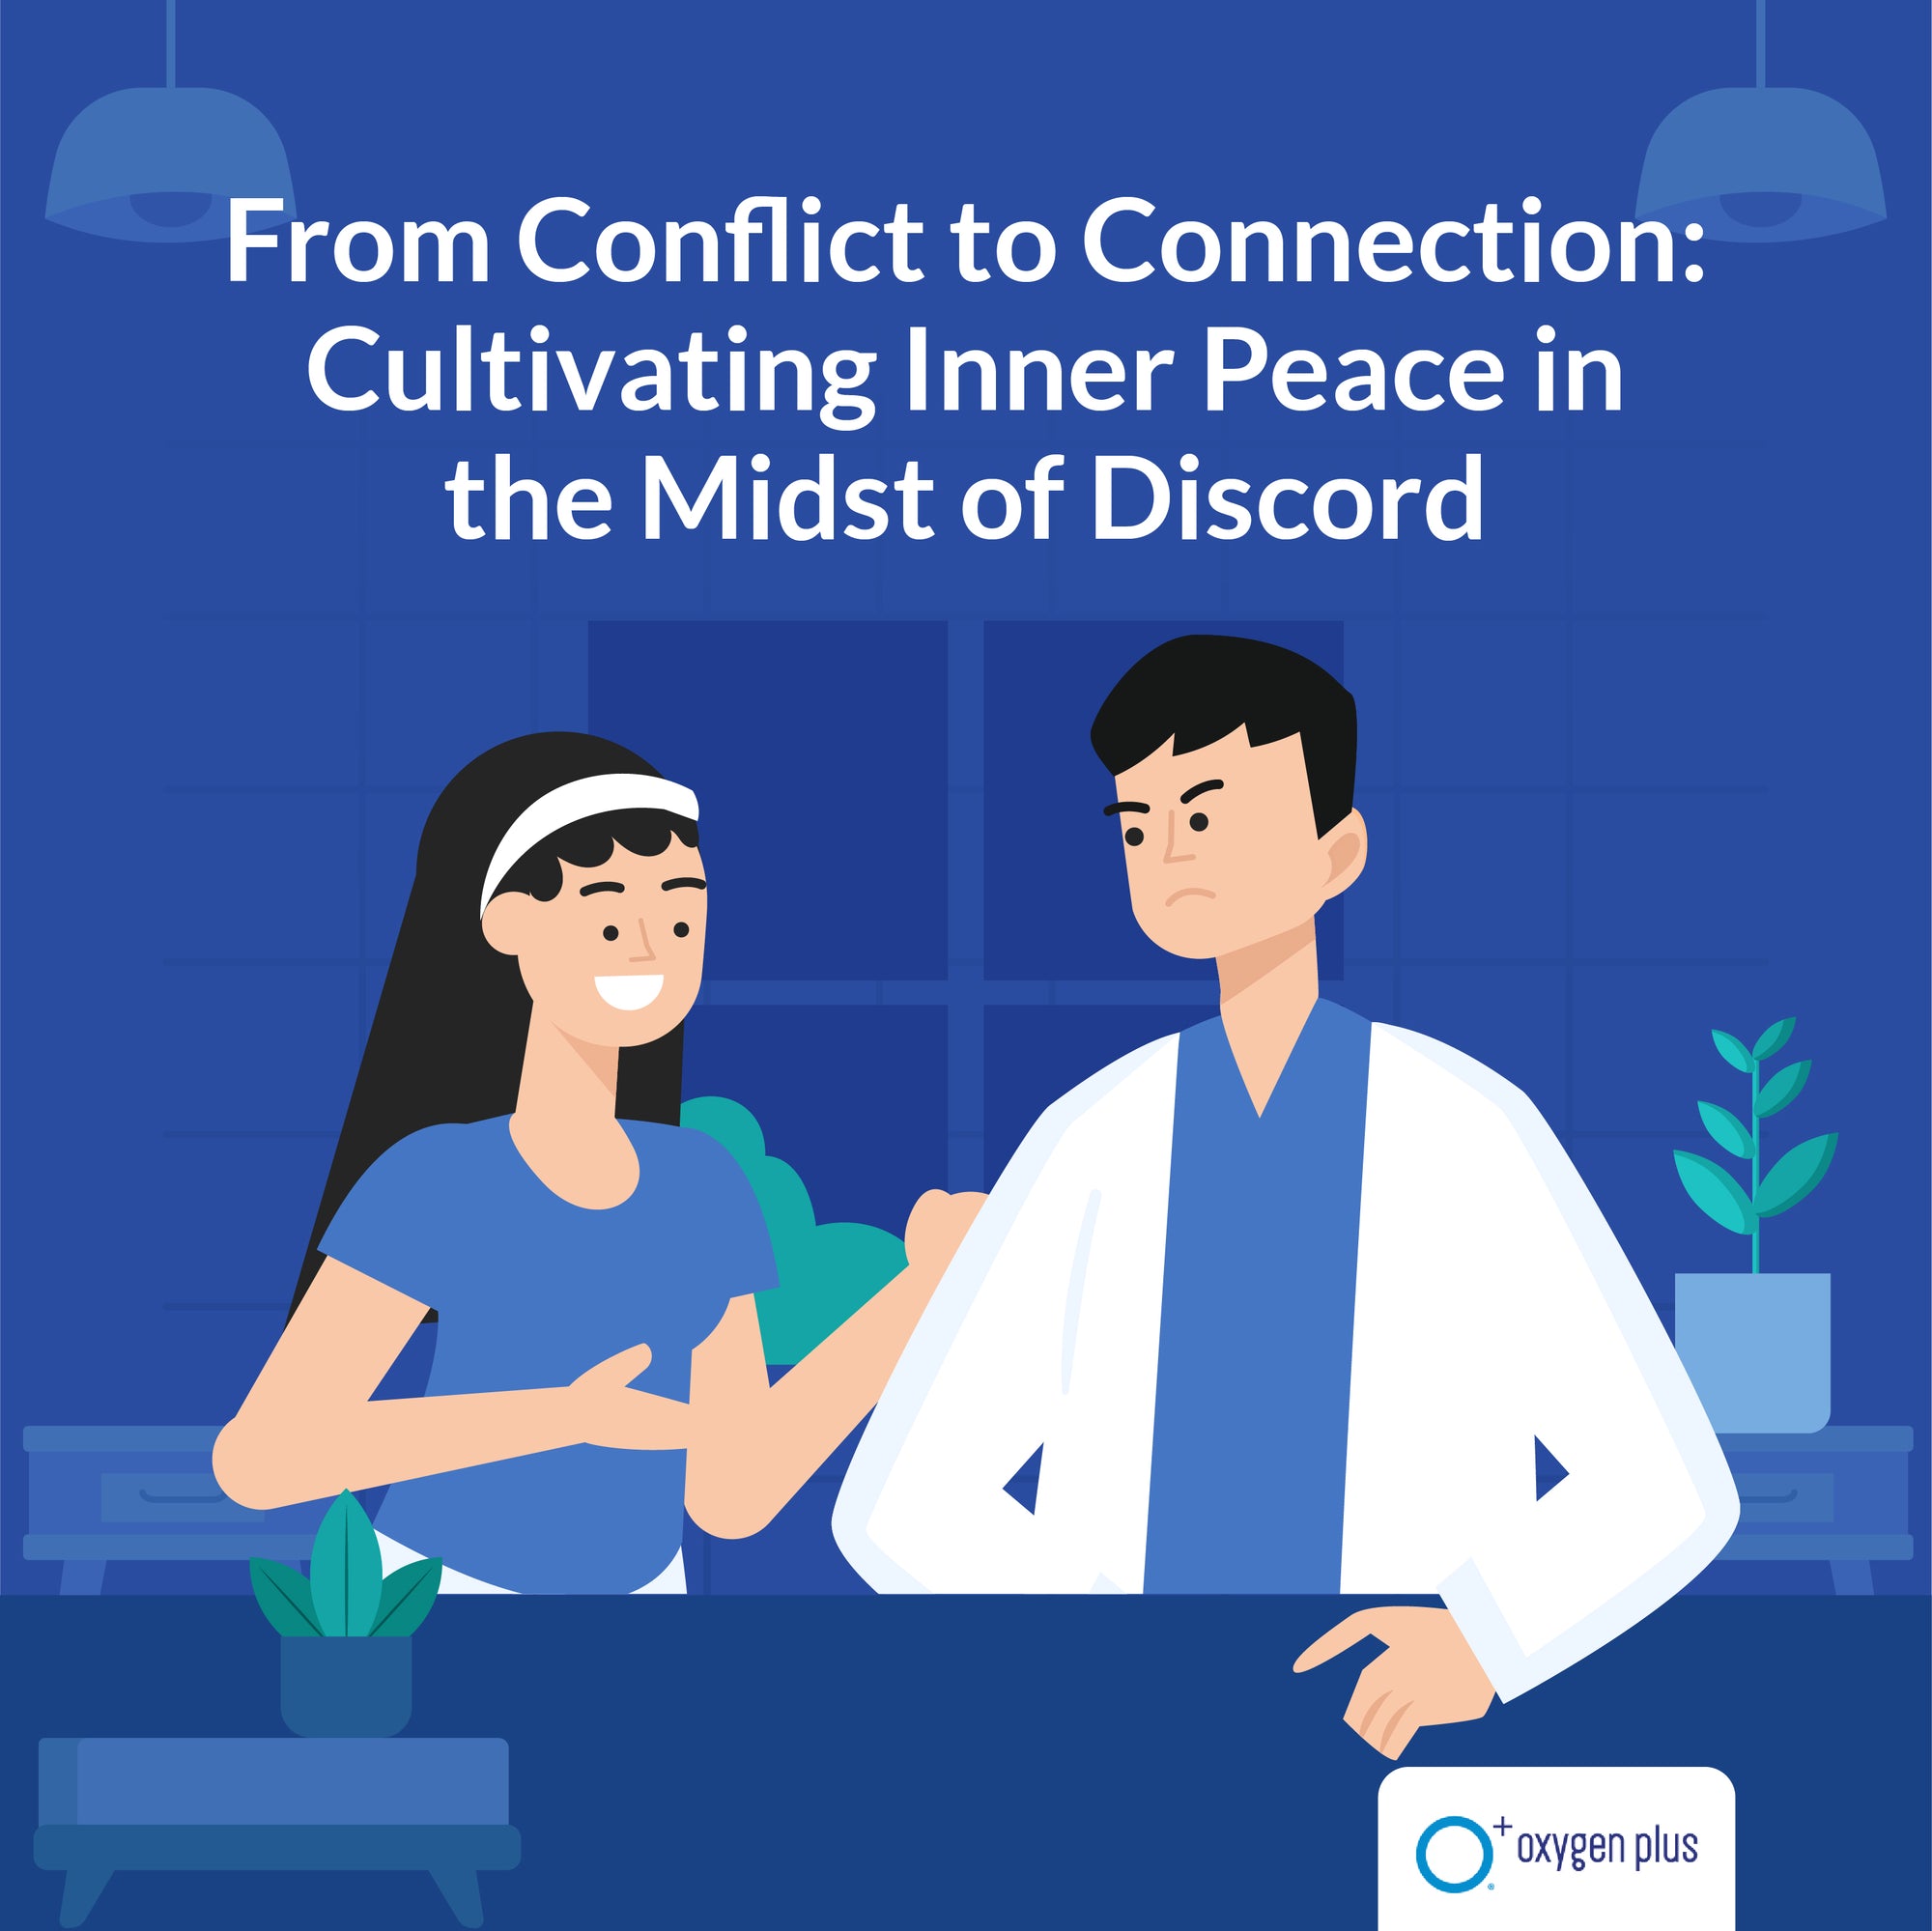 From Conflict to Connection: Cultivating Inner Peace in the Midst of Discord